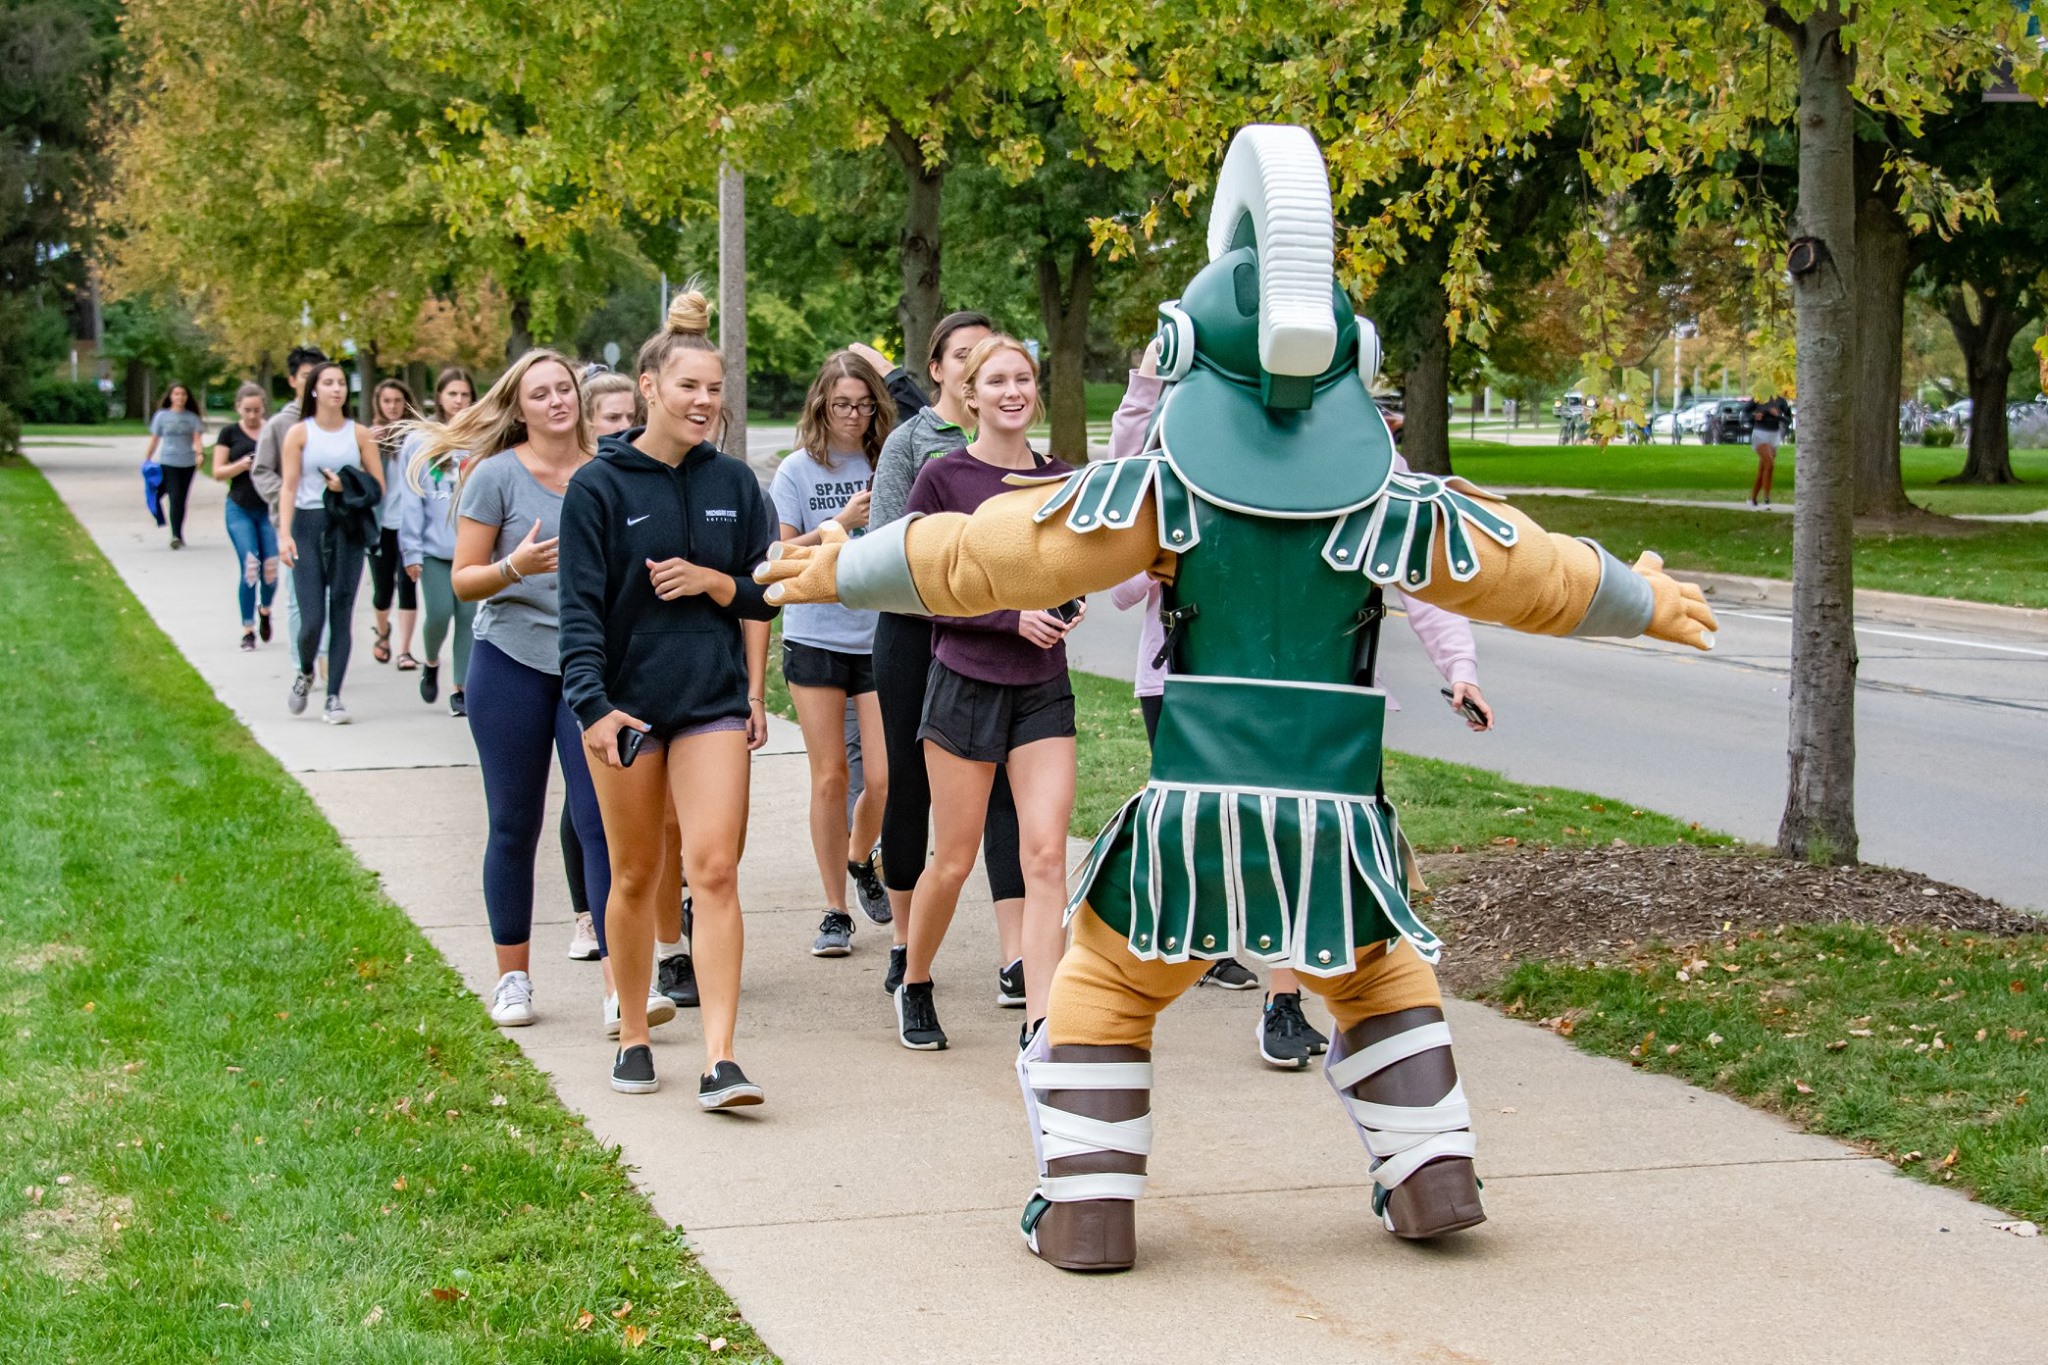 6th Annual Healthy Homecoming Walk to Take Place September 29